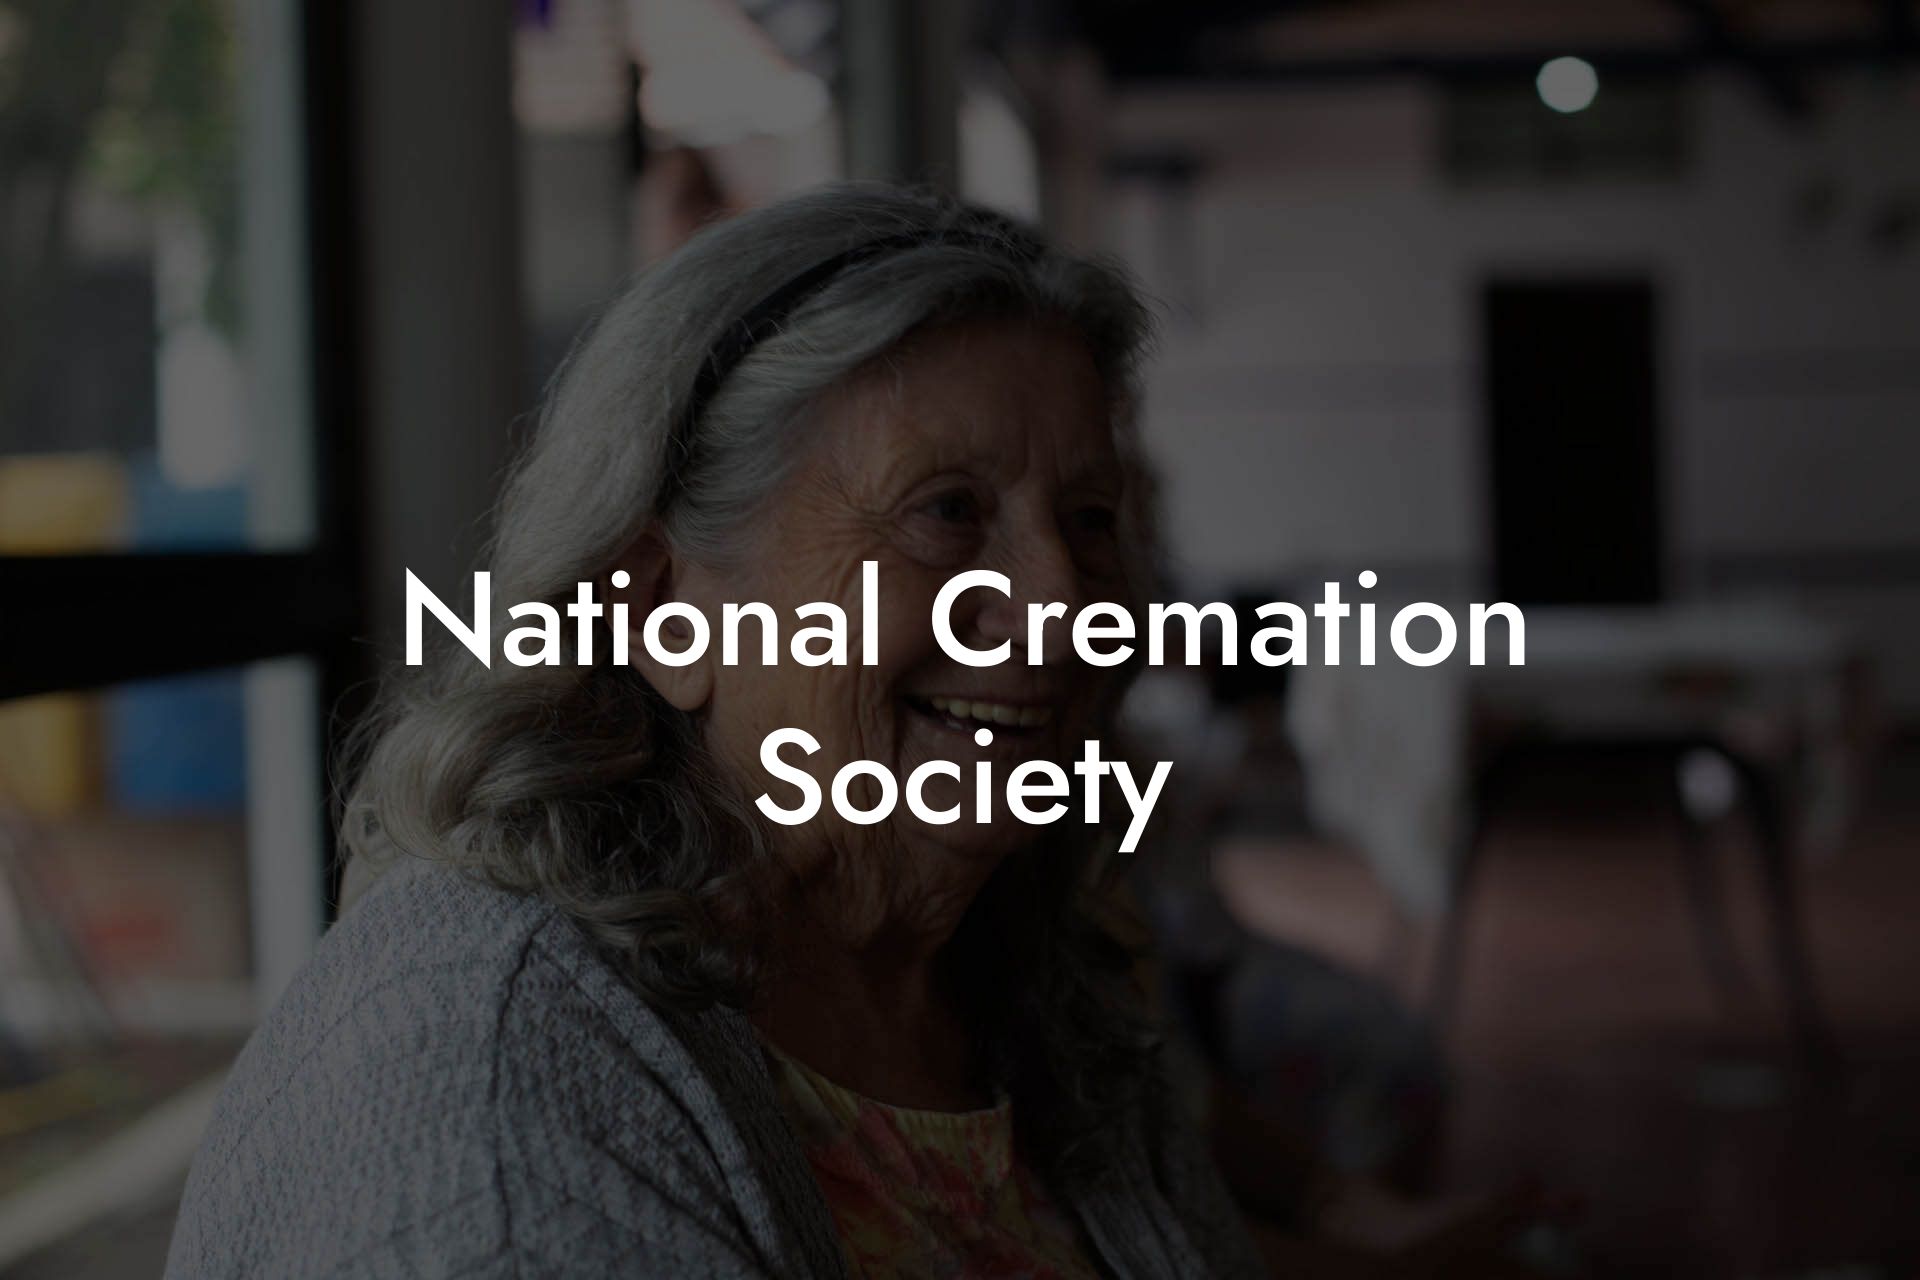 National Cremation Society